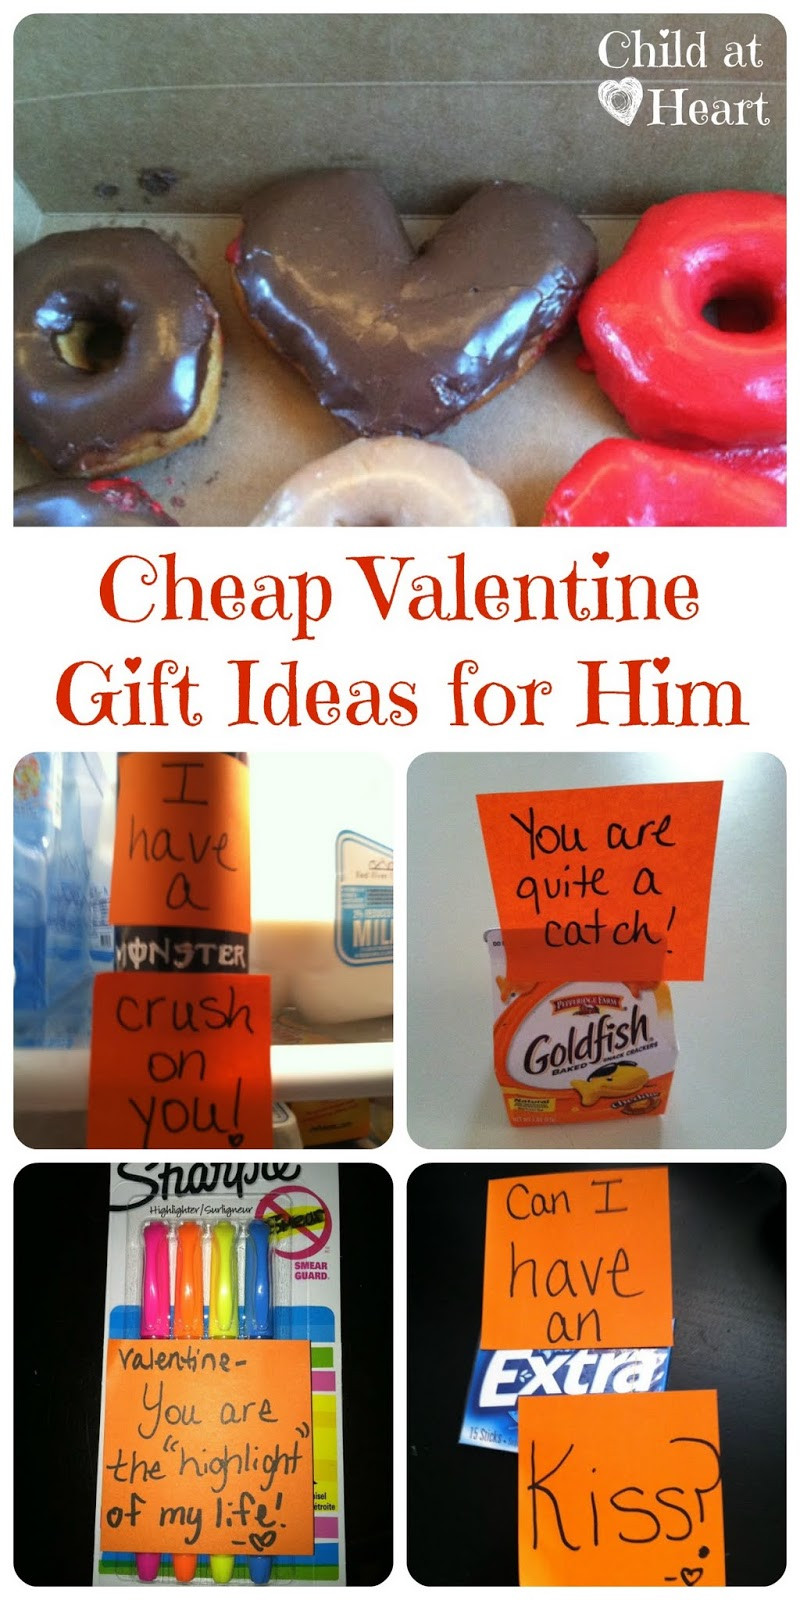 Gift Ideas For Him On Valentines
 301 Moved Permanently